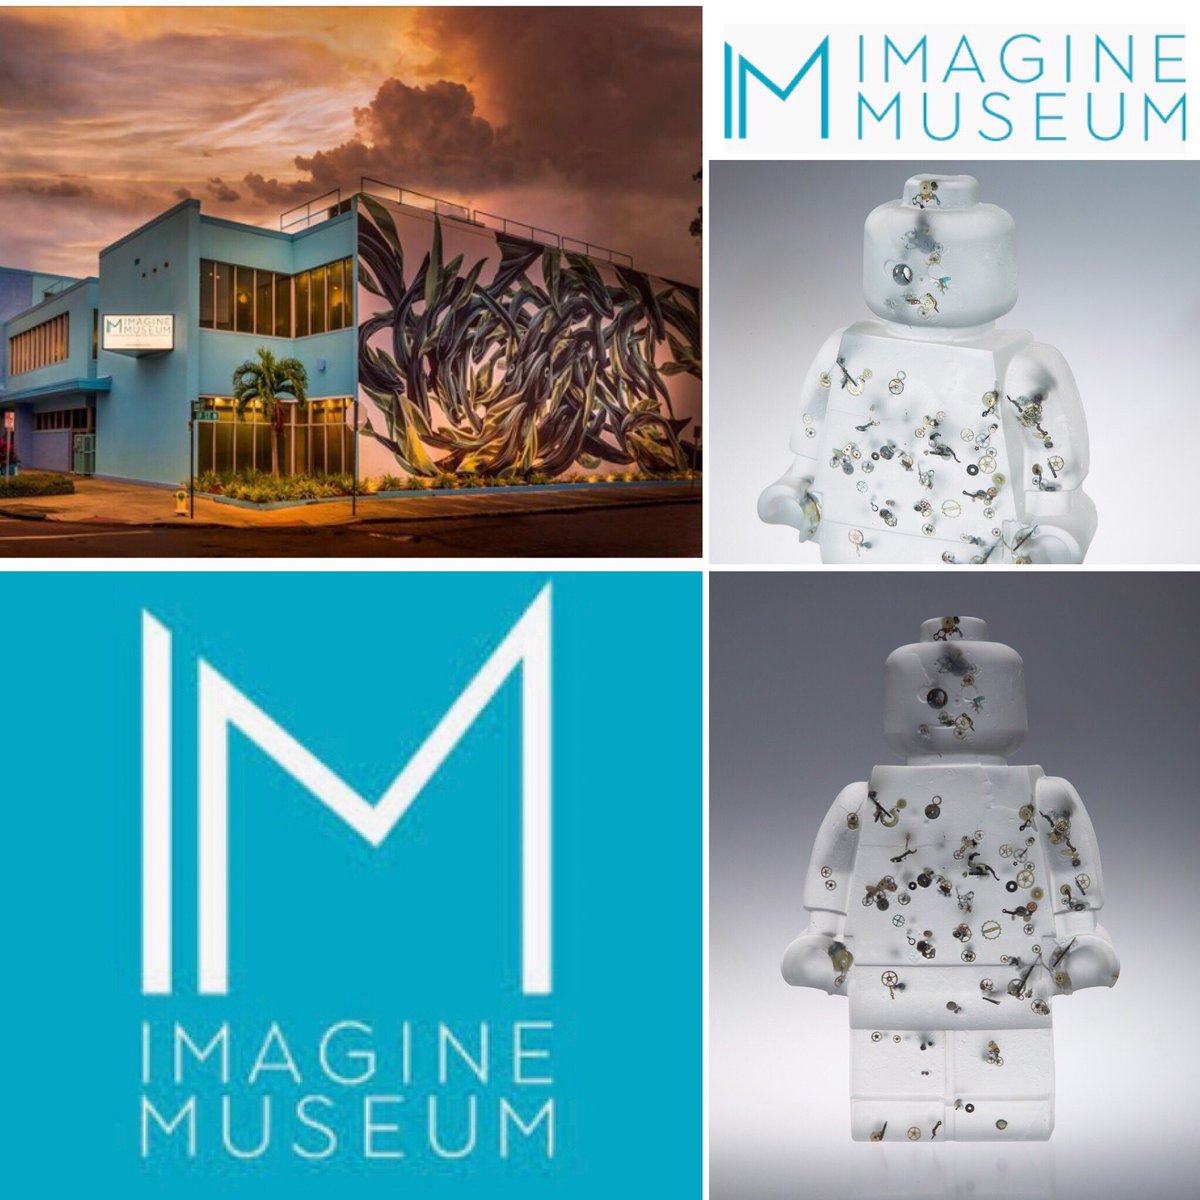 Overwhelmingly excited to have a Sweet Nothing in the Collection at The Imagine Museum, St Petersburg 
imaginemuseum.com
#recycledglass 
#castglass
#figurativeglasssculpture
#figurativeglassart 
#pg_school_craft_design_uca 
#recycle
#stpetersburgflorida 
@imaginemuseum